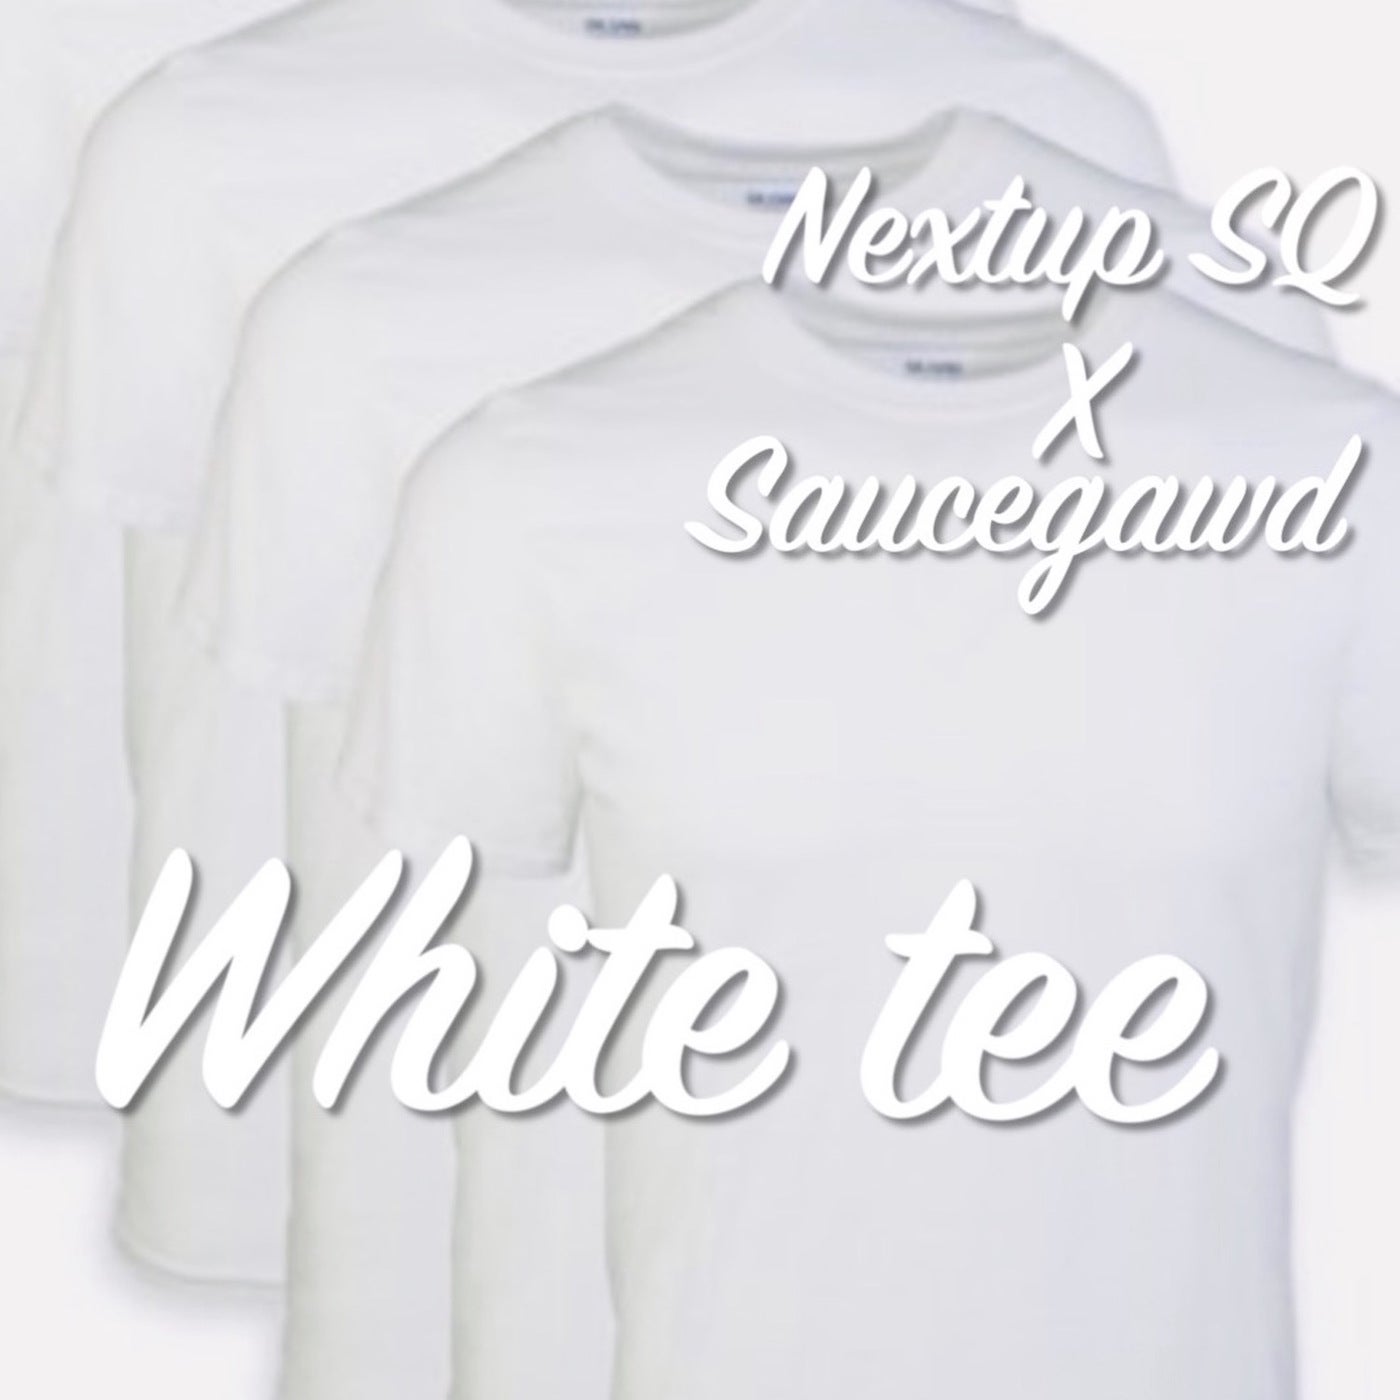 White Tee (feat. Saucegawd)